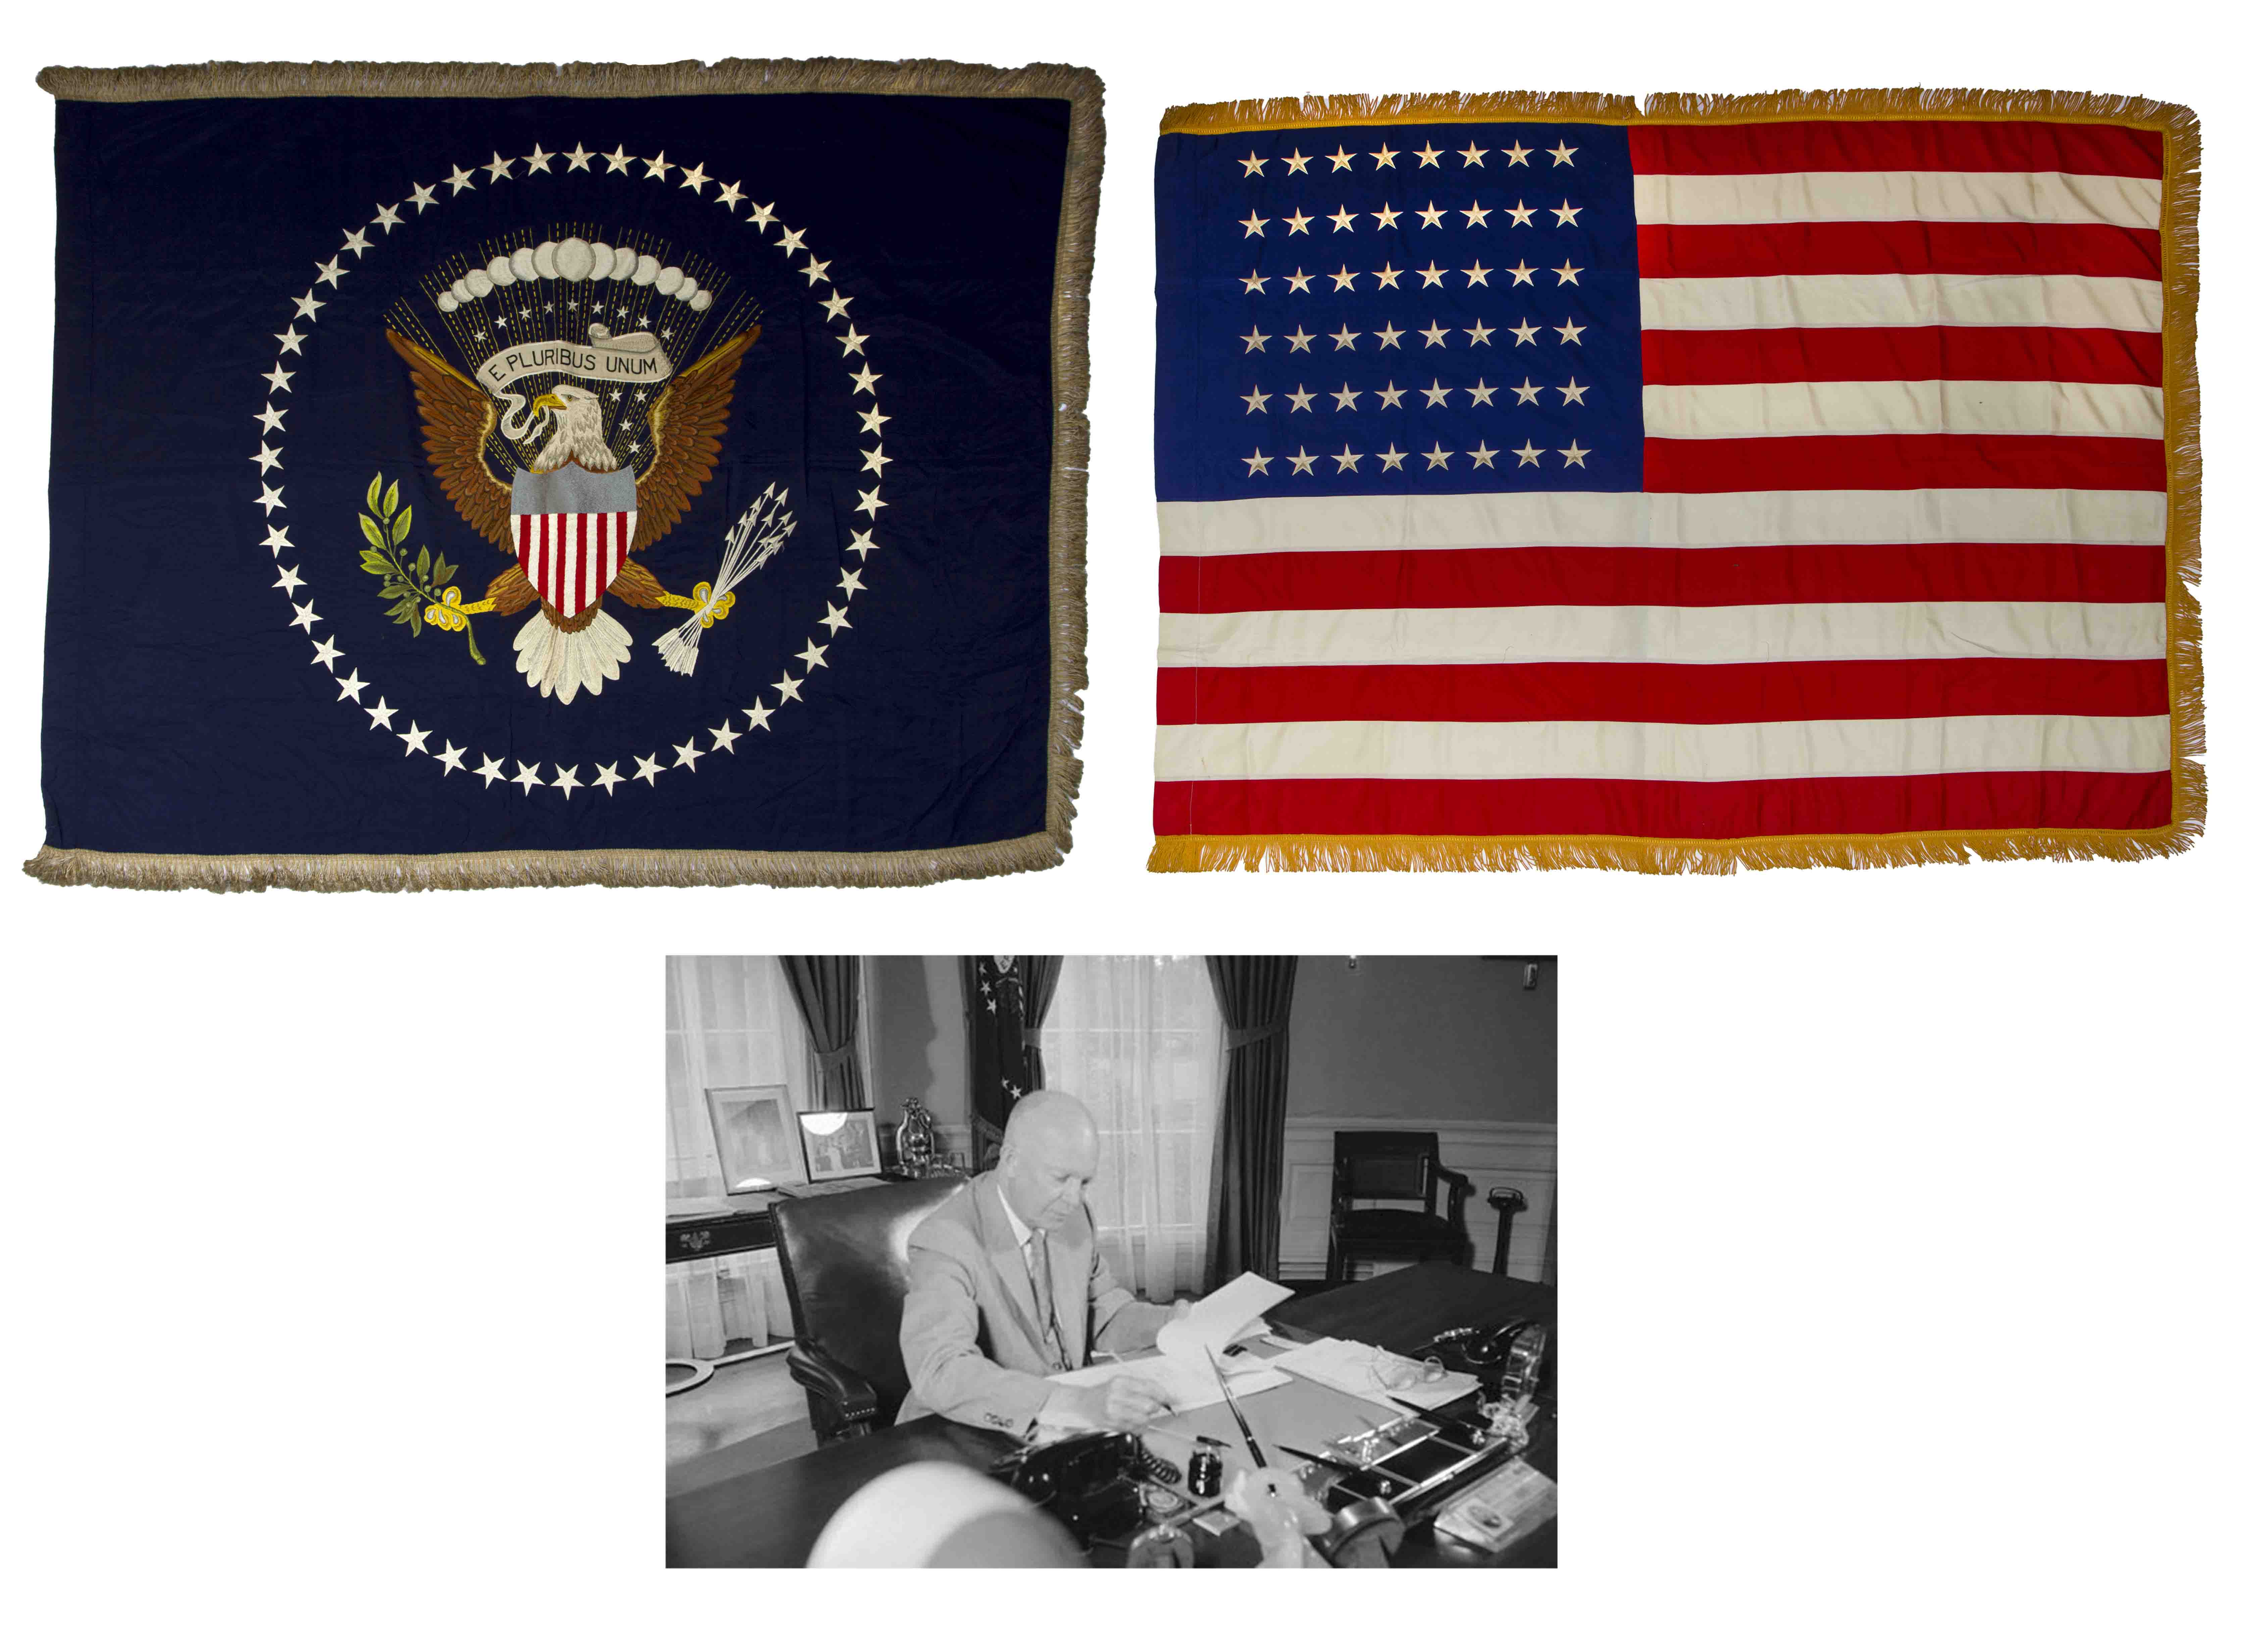 Lot Detail Extremely Scarce Set Of Oval Office Flags The 48 Star Flags Displayed In President Dwight D Eisenhower S Oval Office In The White House 1 Of 3 Known Sets From